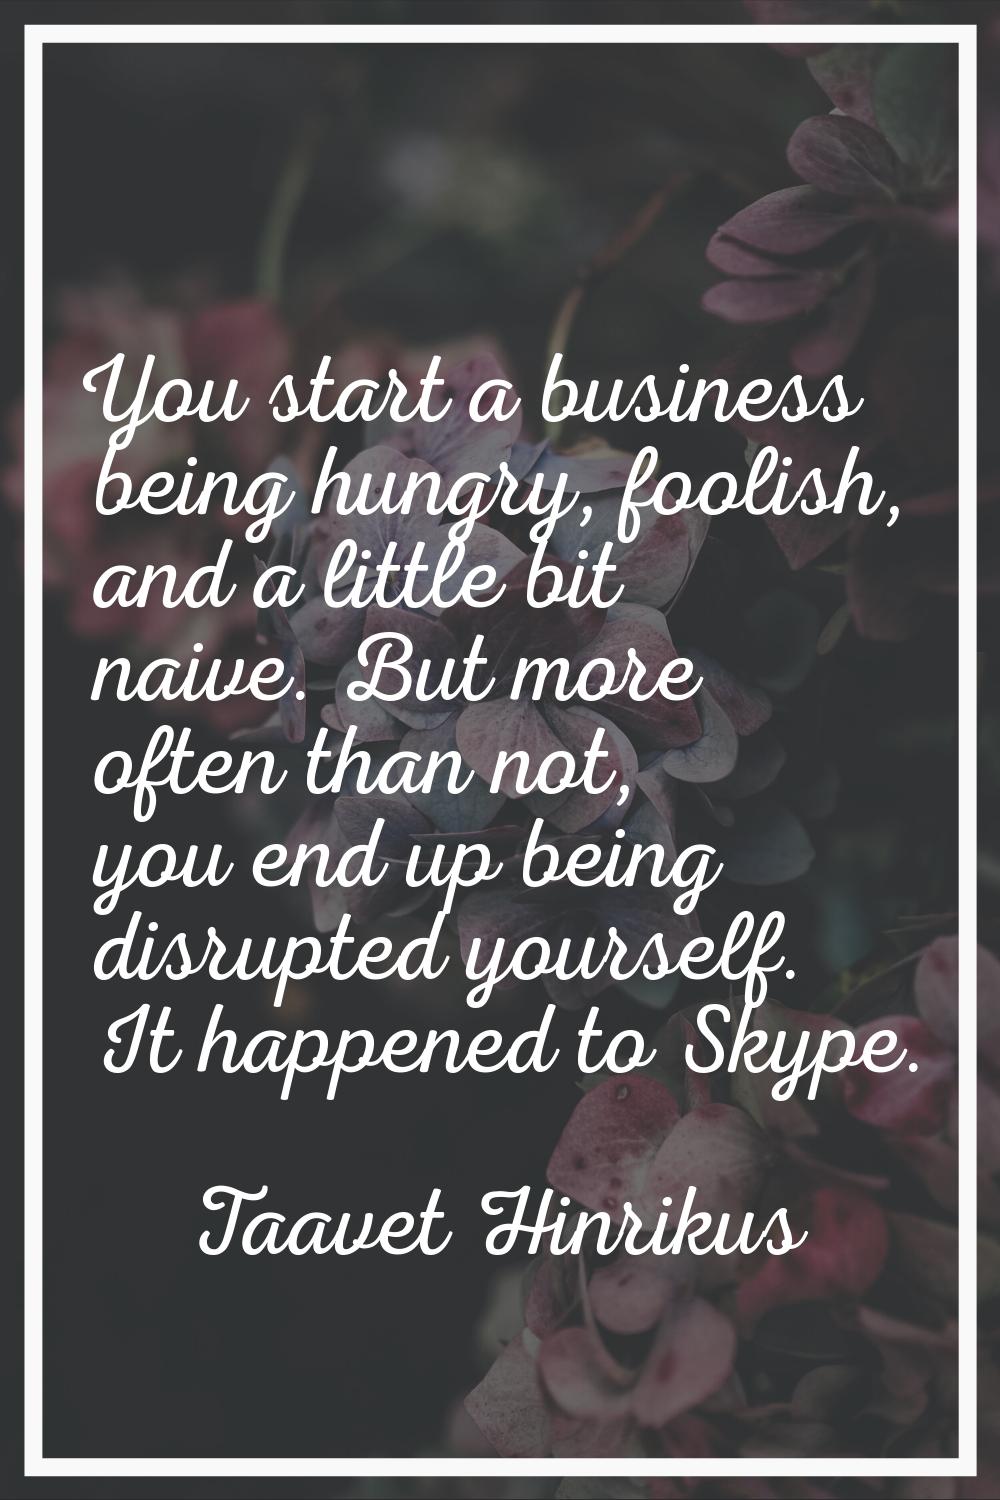 You start a business being hungry, foolish, and a little bit naive. But more often than not, you en